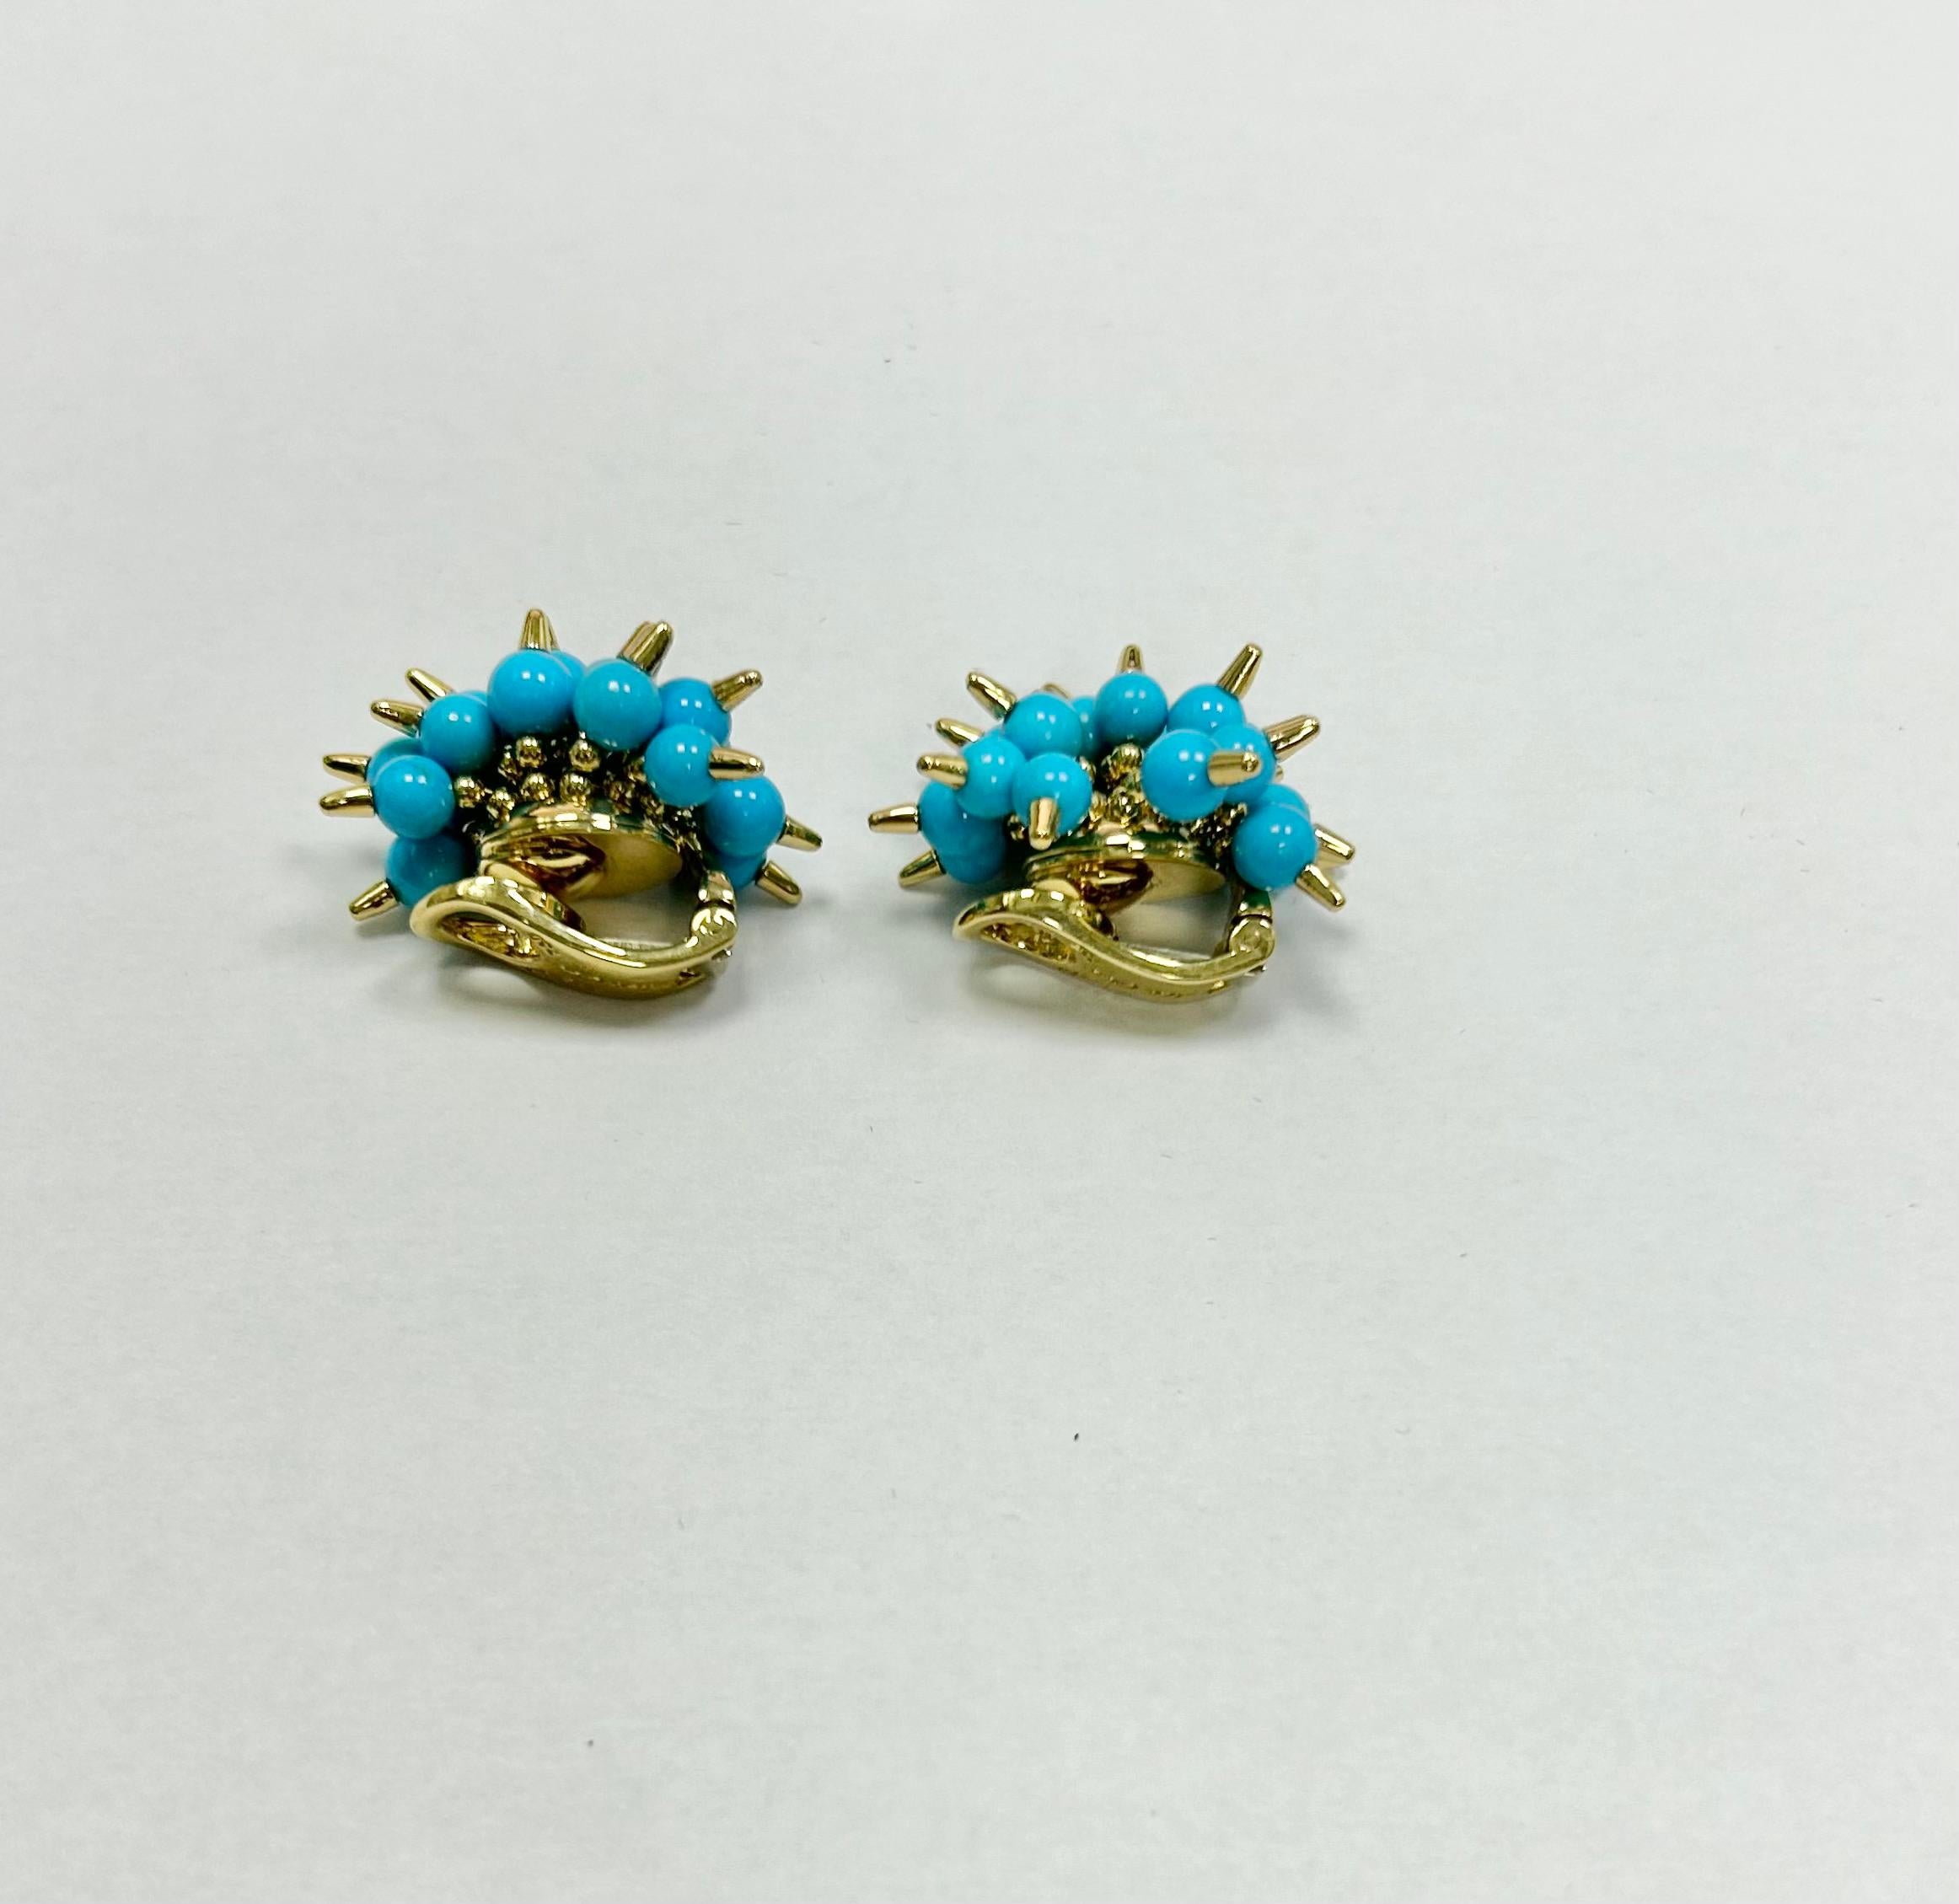 Gorgeous movable turquoise with gold spikes approx 38 total ear clip earrings by Alittle brother stamped 750 